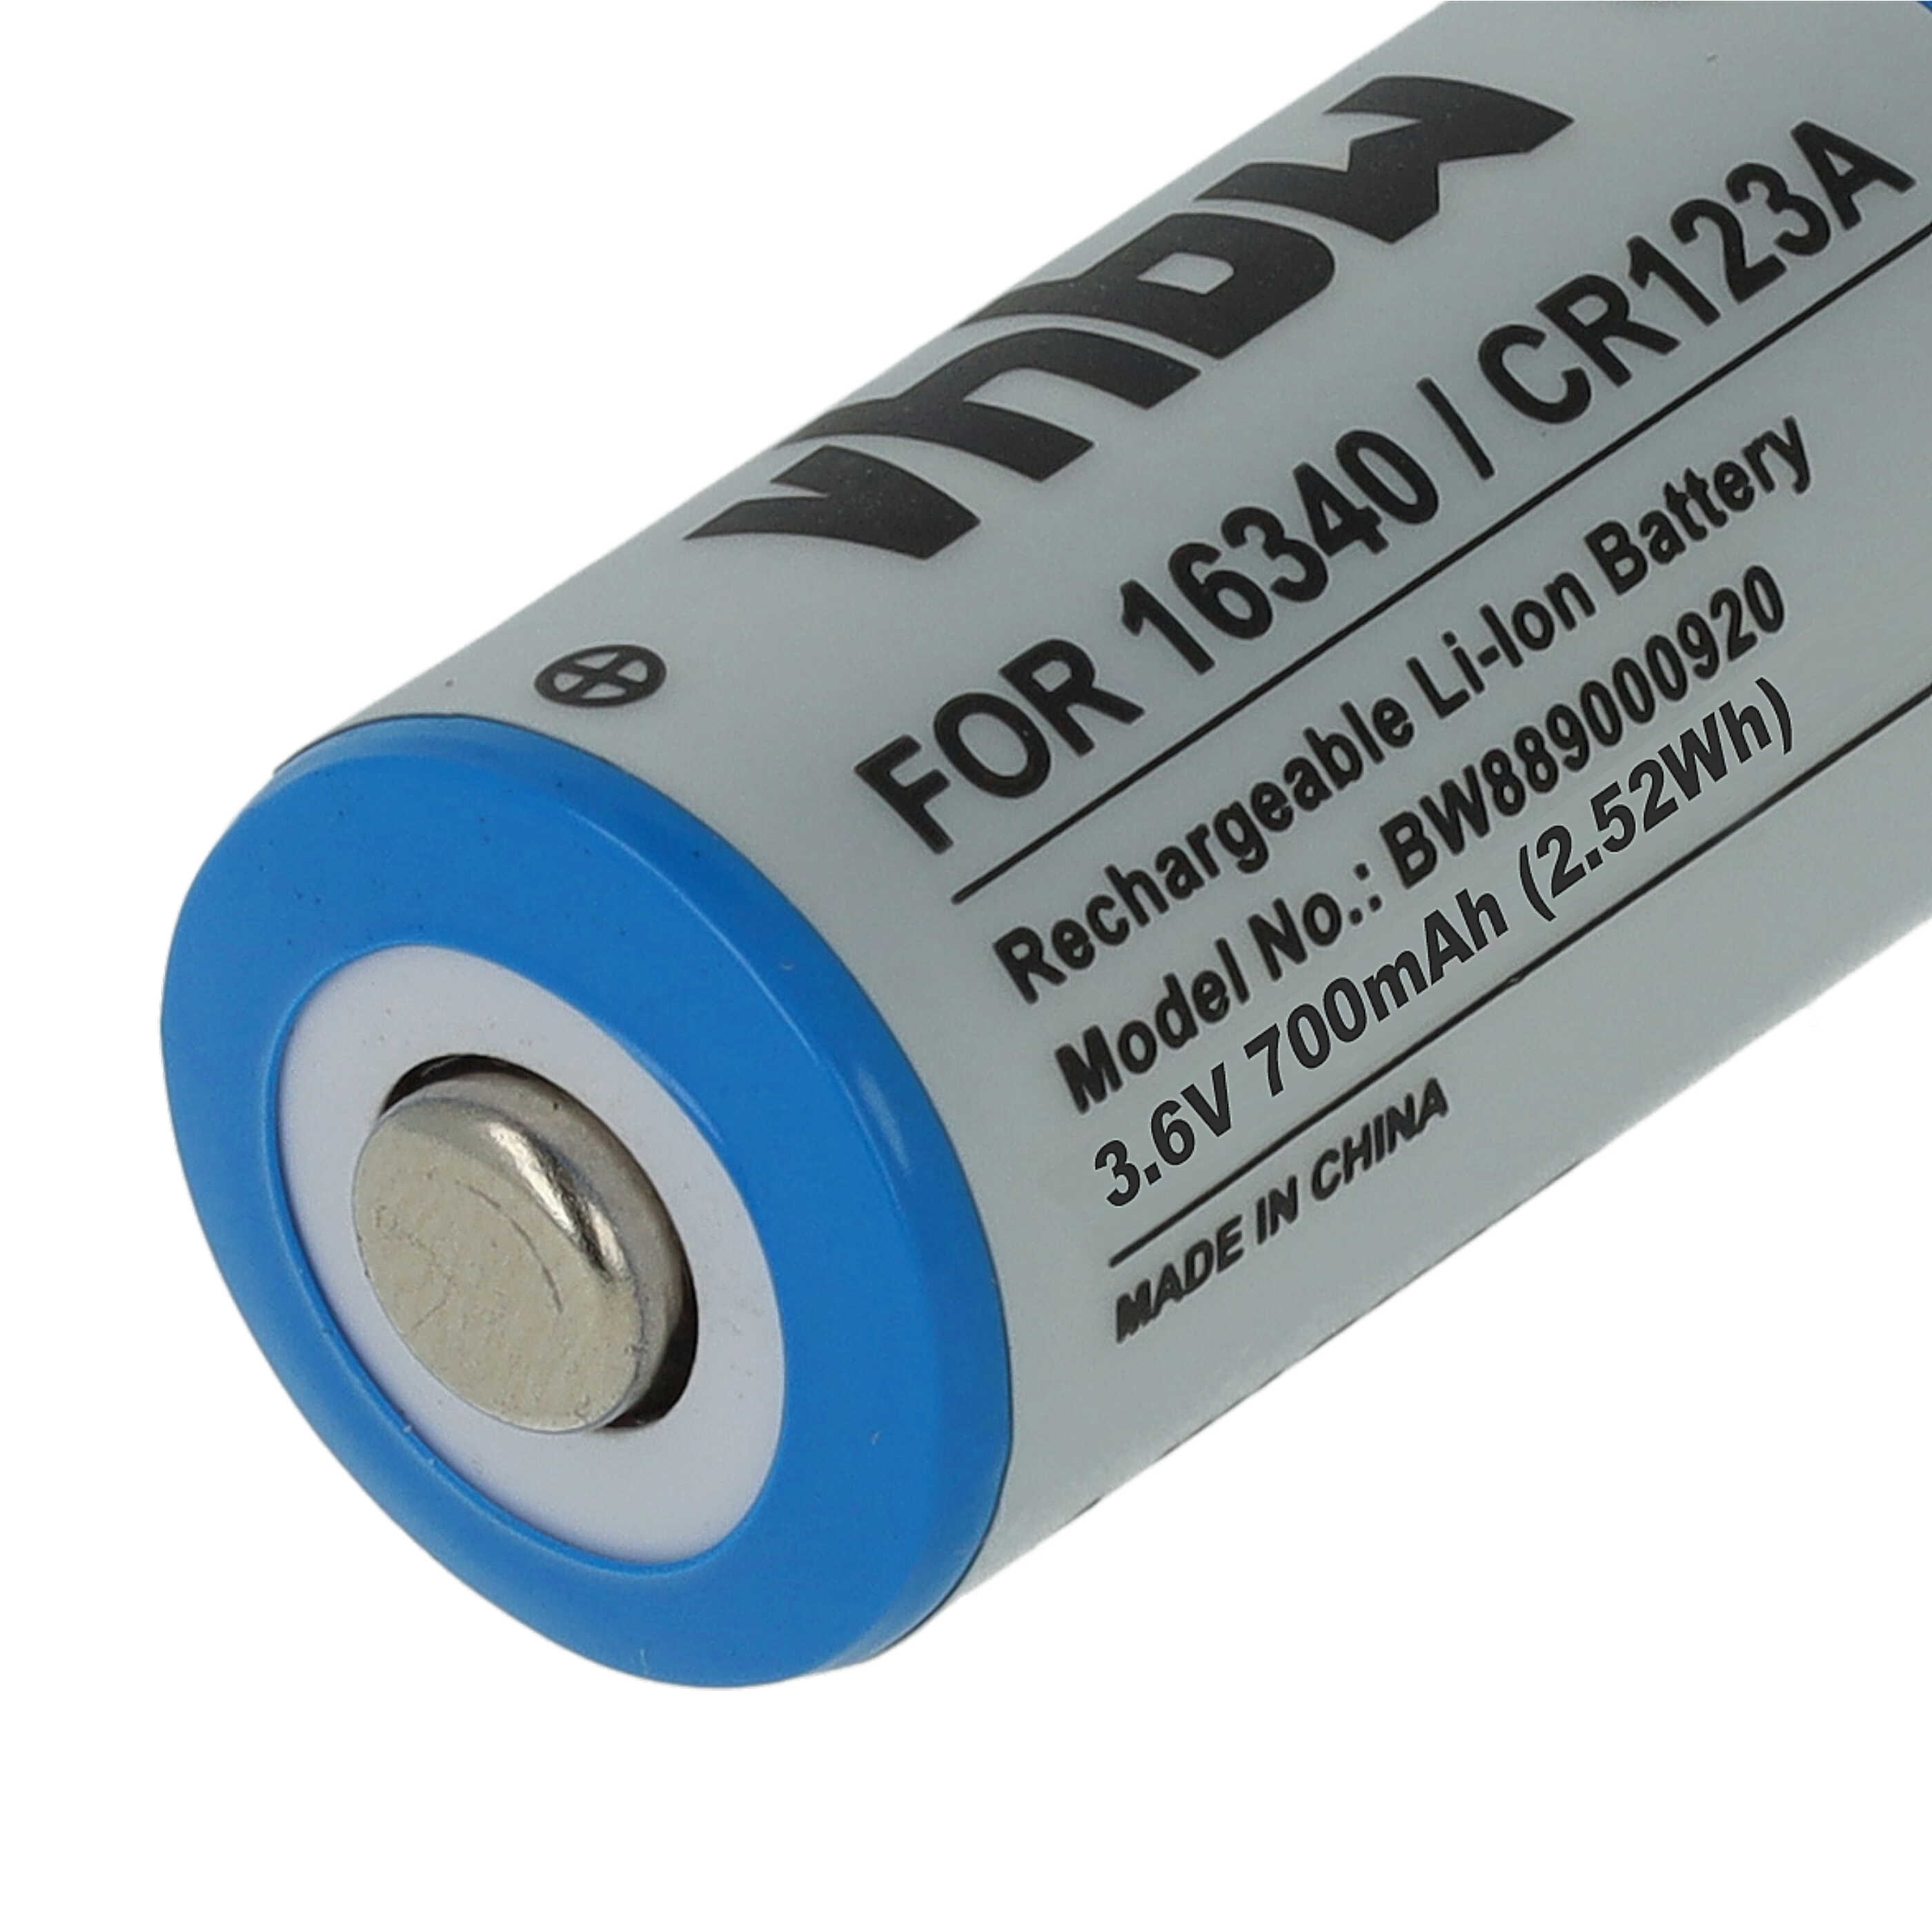 Battery (2 Units) Replacement for 16340, DL123A, CR123R, CR17335, CR17345, CR123A - 700mAh 3.6V Li-Ion